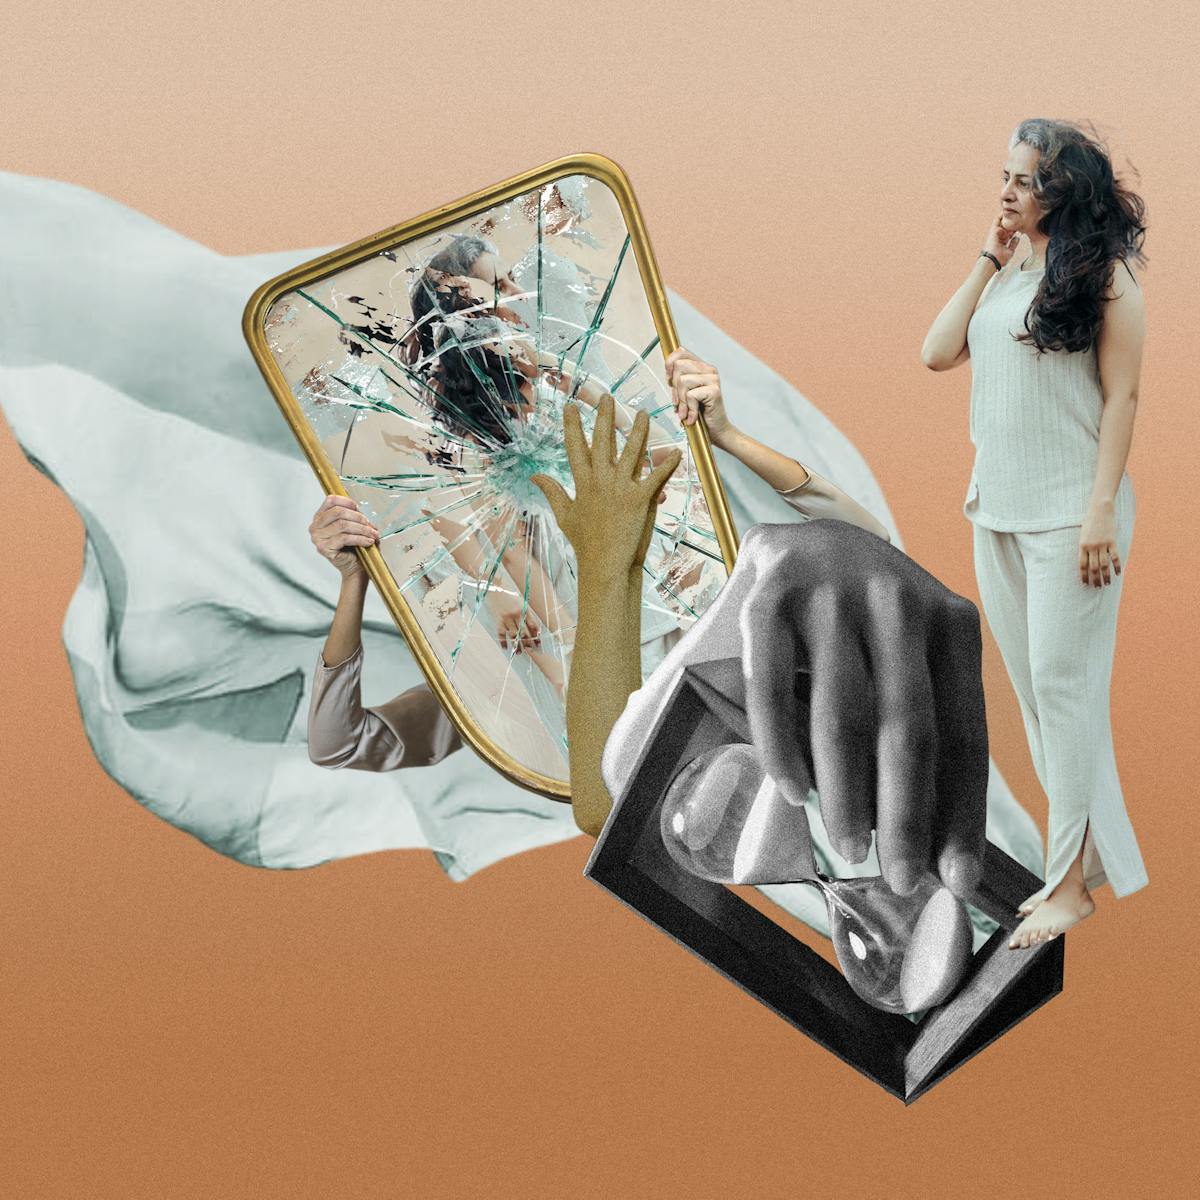 Digital collage artwork made up of orange, cyan and black and white hues. A woman dressed in a white top and trousers stands looking into a large mirror, held in front of her by a pair of arms. The surface of the mirror is fractured and broken. To the Side of the mirror a large hand reaches for an hour glass in which the sand is pouring from one chamber to the other. Behind this scene is billowing sheet covering the lower half of a woman's leg.